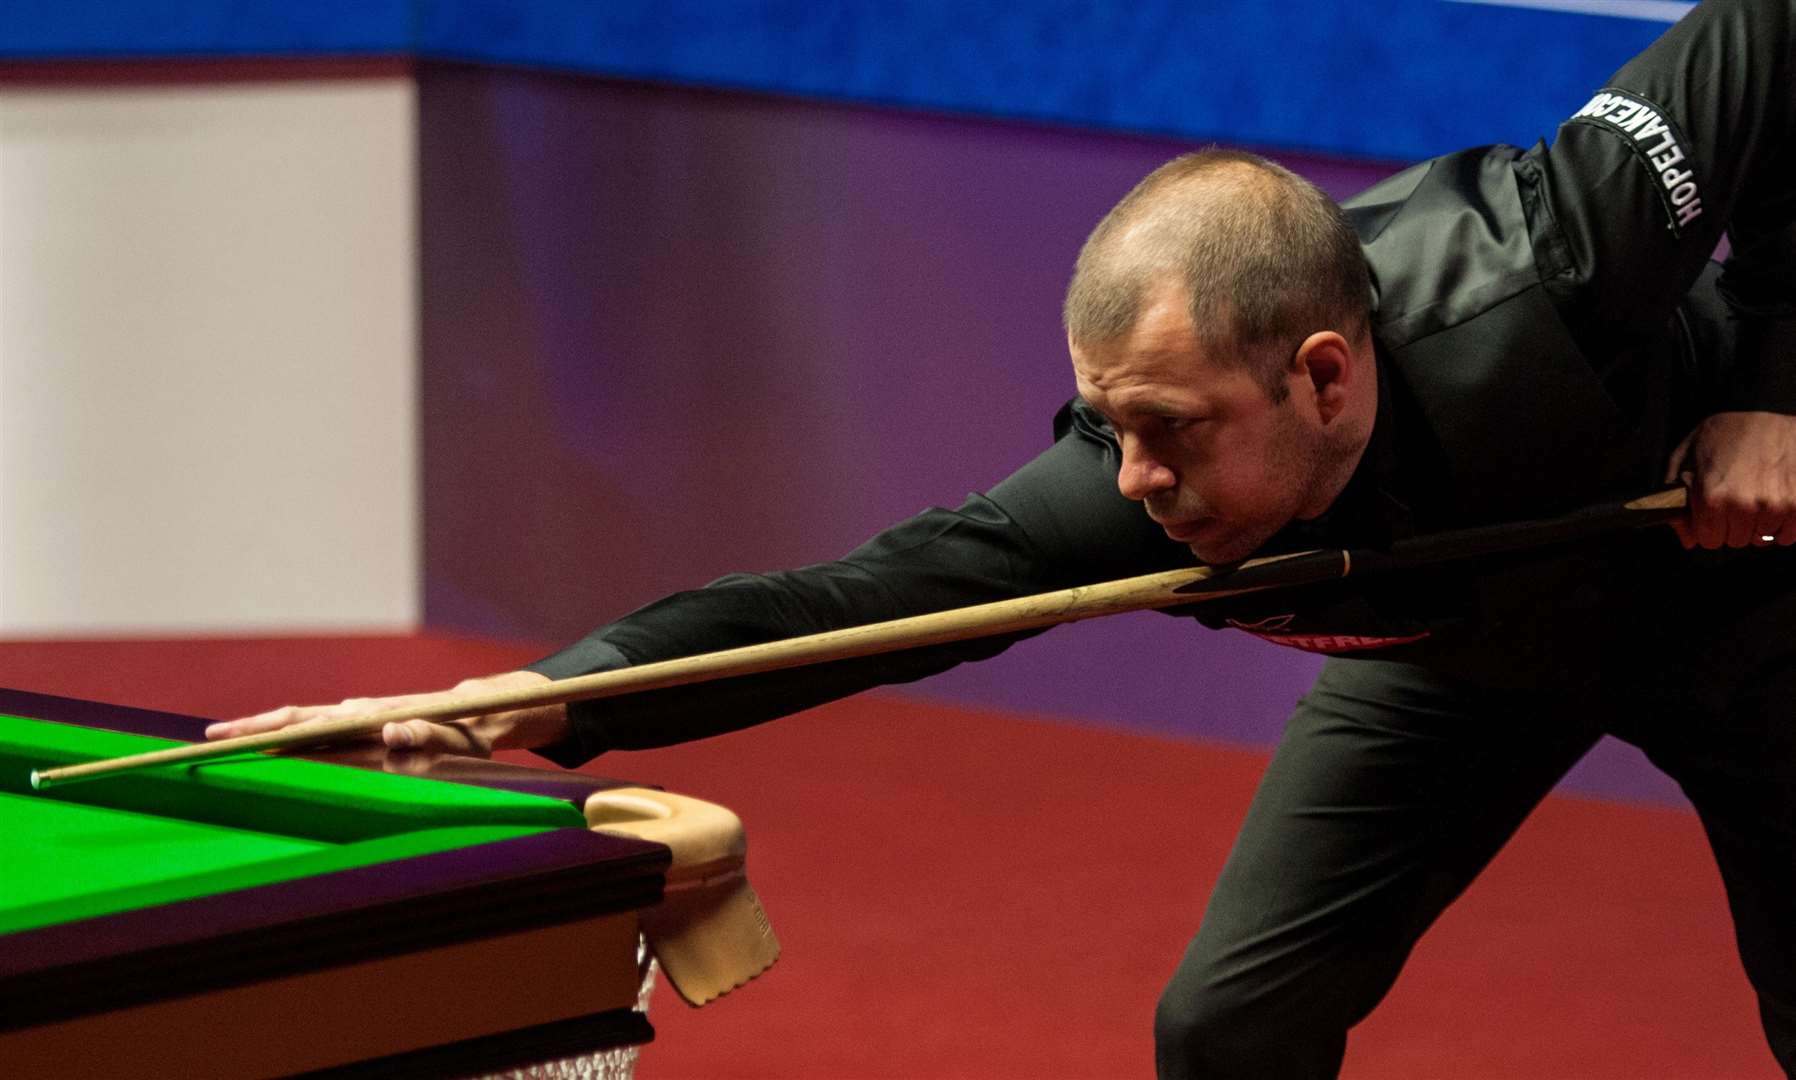 The wait was finally over for Barry Hawkins after a first ranking title in six years at the European Masters. Picture: World Snooker